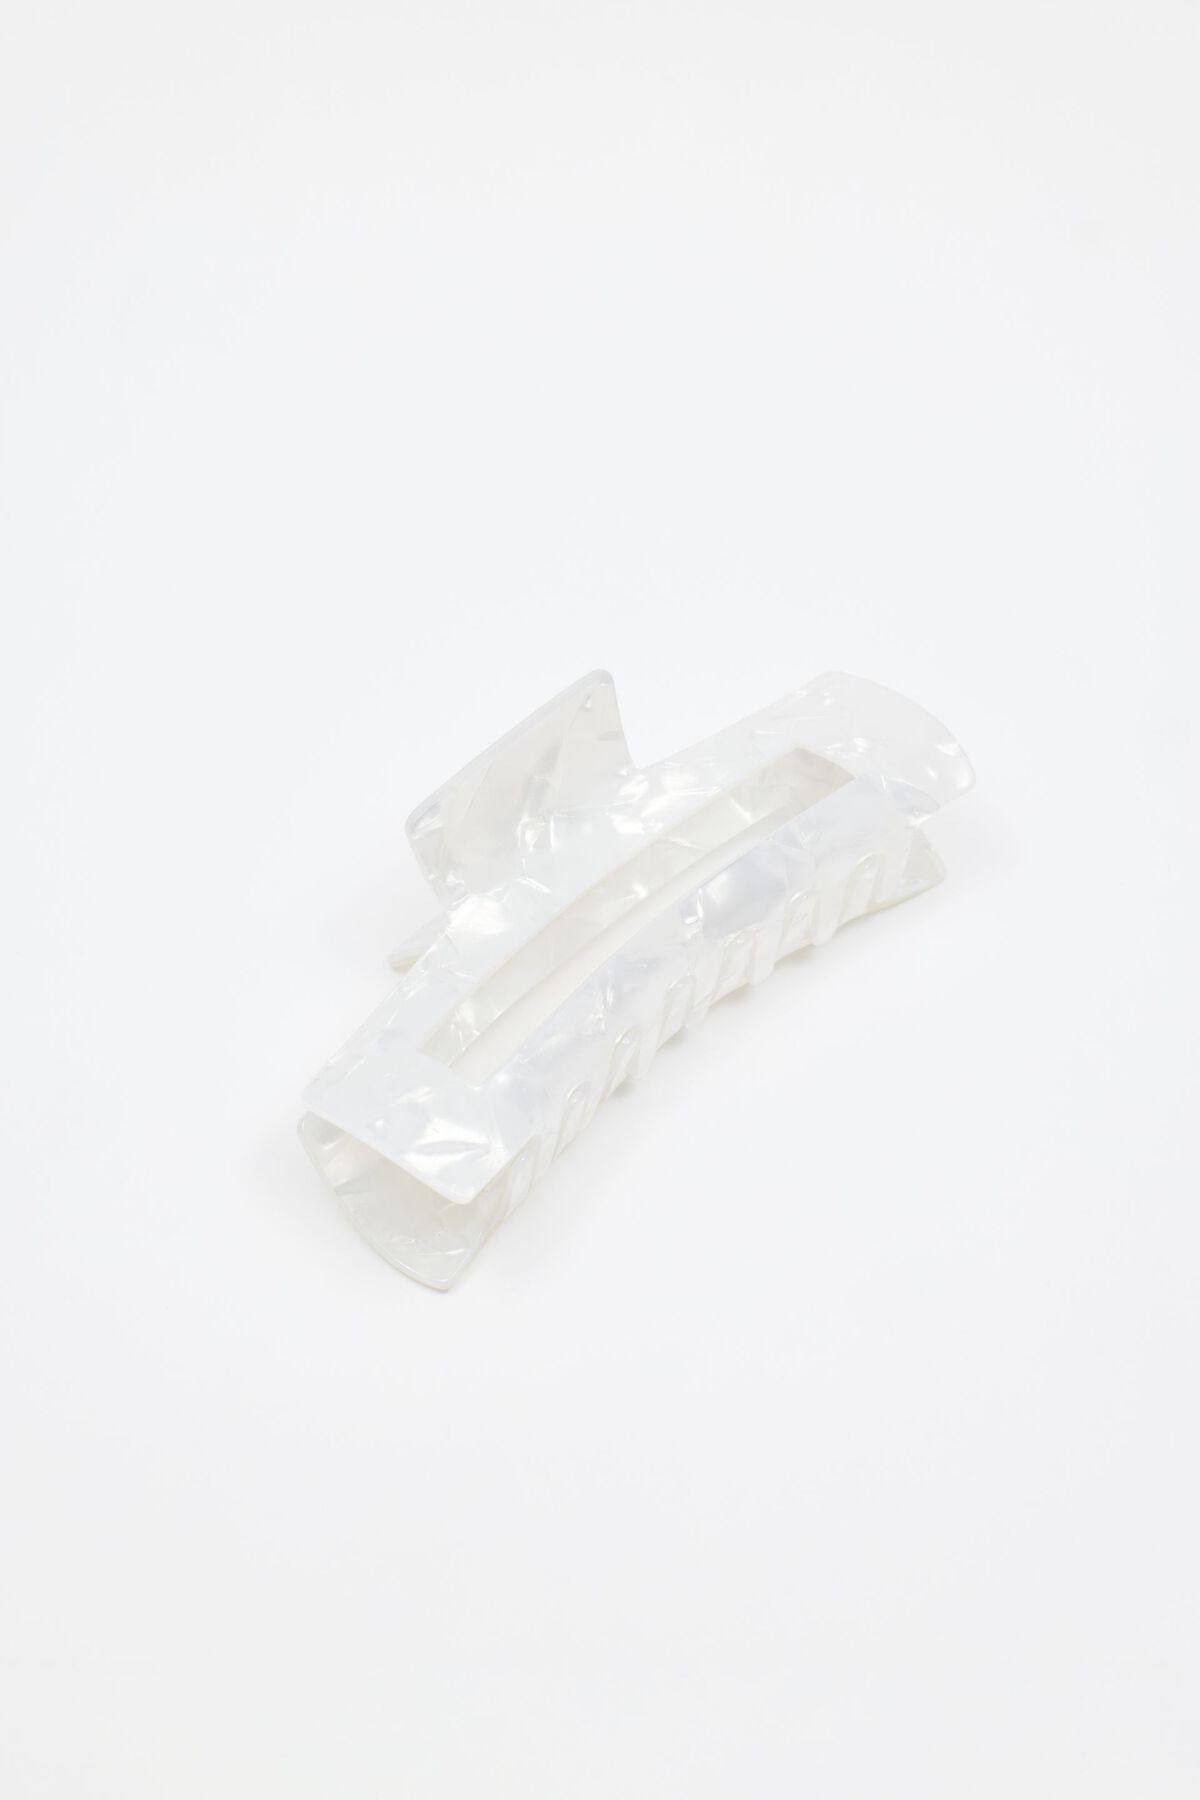 Dynamite Super Sized Rectangle Claw Hair Clip. 1